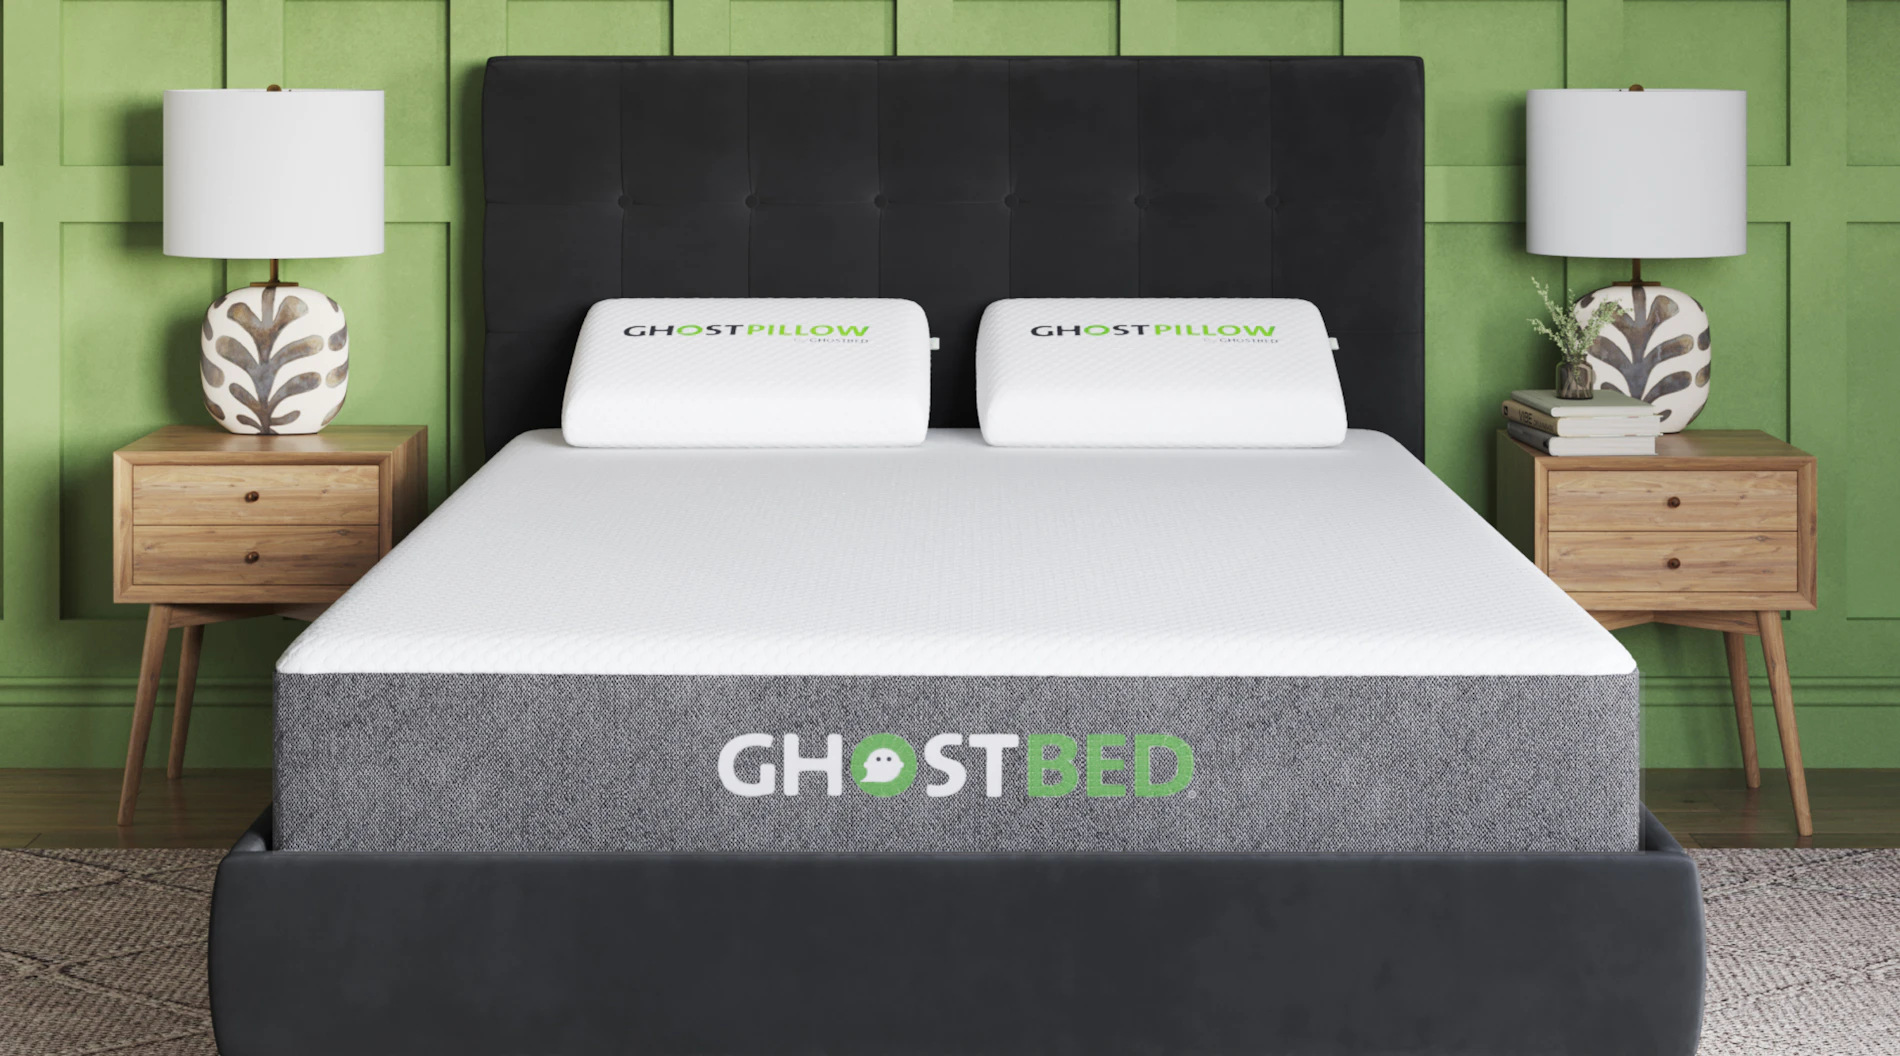 Compare GhostBed and Tempur-Pedic mattresses